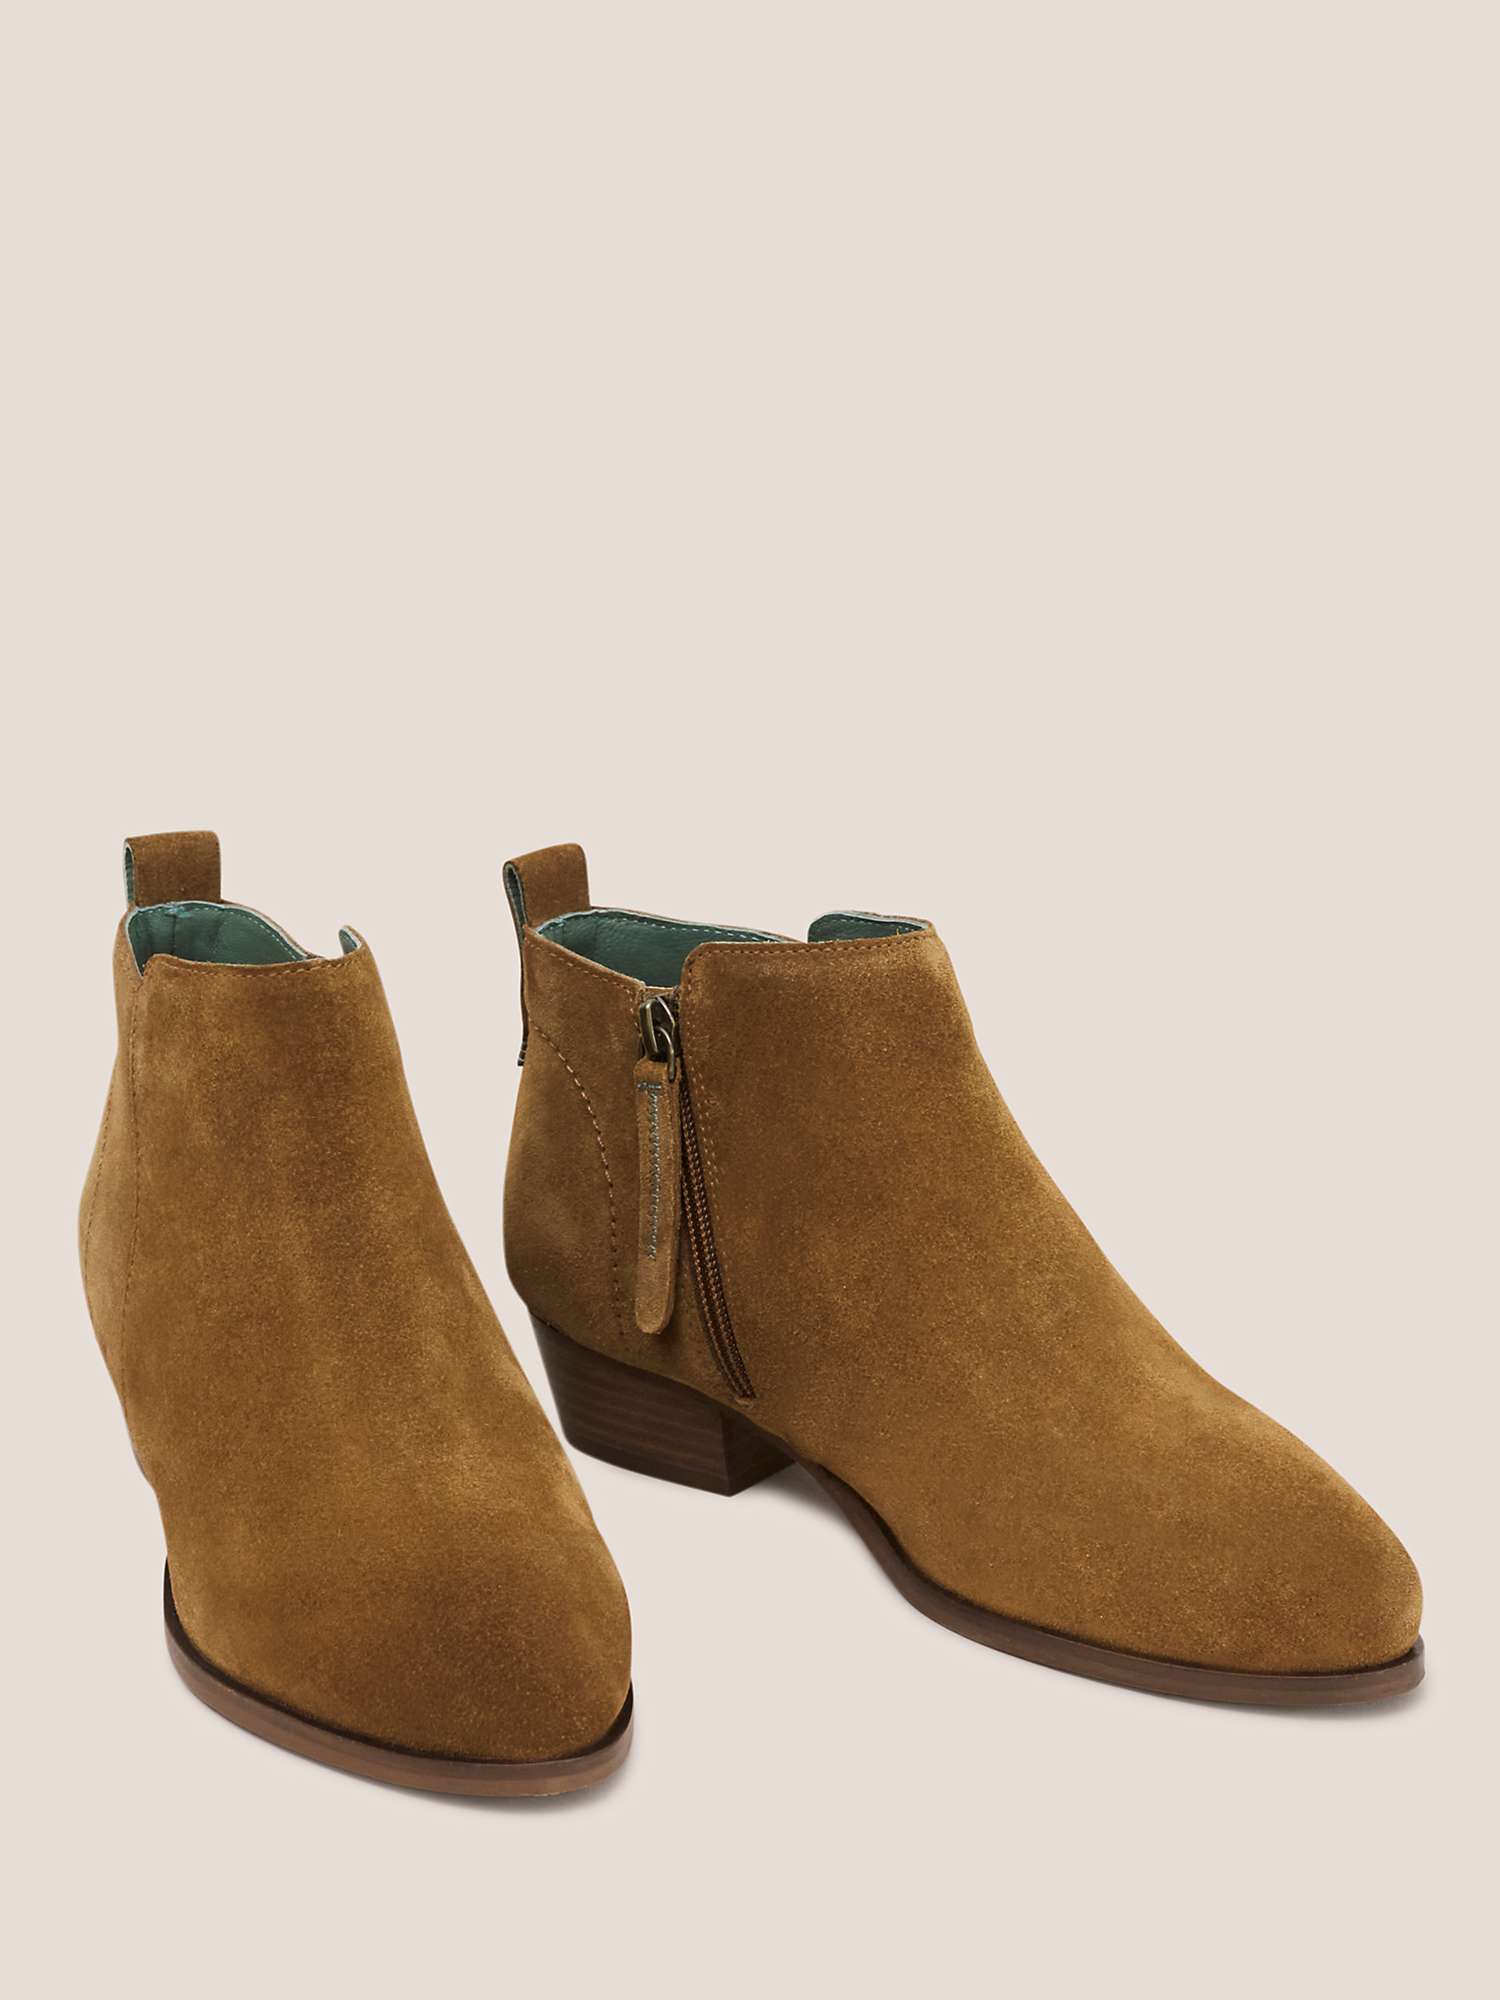 Buy White Stuff Willow Suede Ankle Boots Online at johnlewis.com